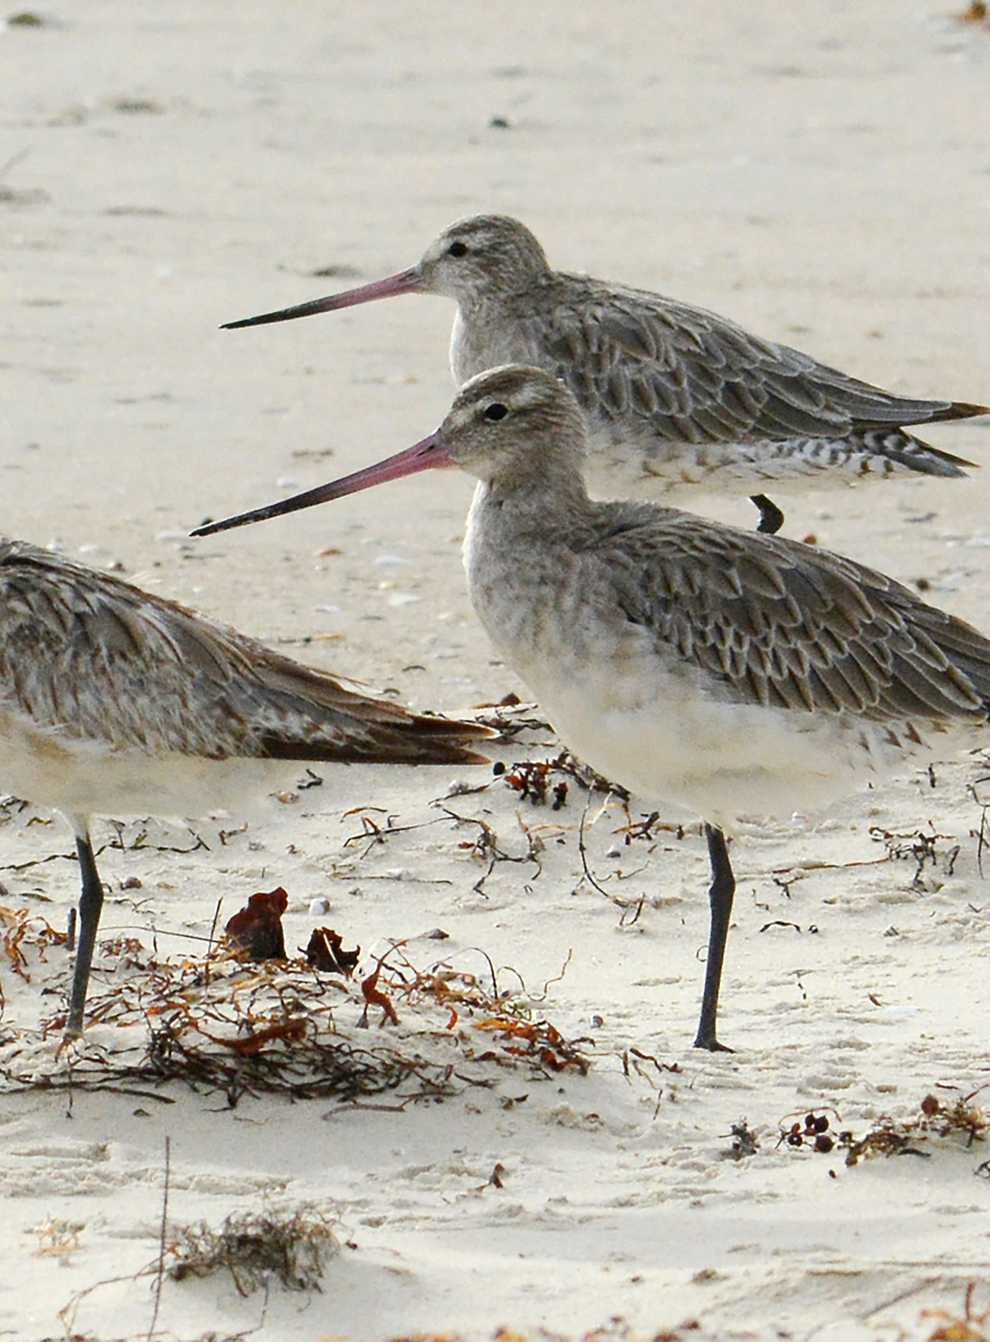 Bar-tailed godwits stand on the beach at Marion Bay in Australia’s Tasmania state (Eric Woehler via AP)